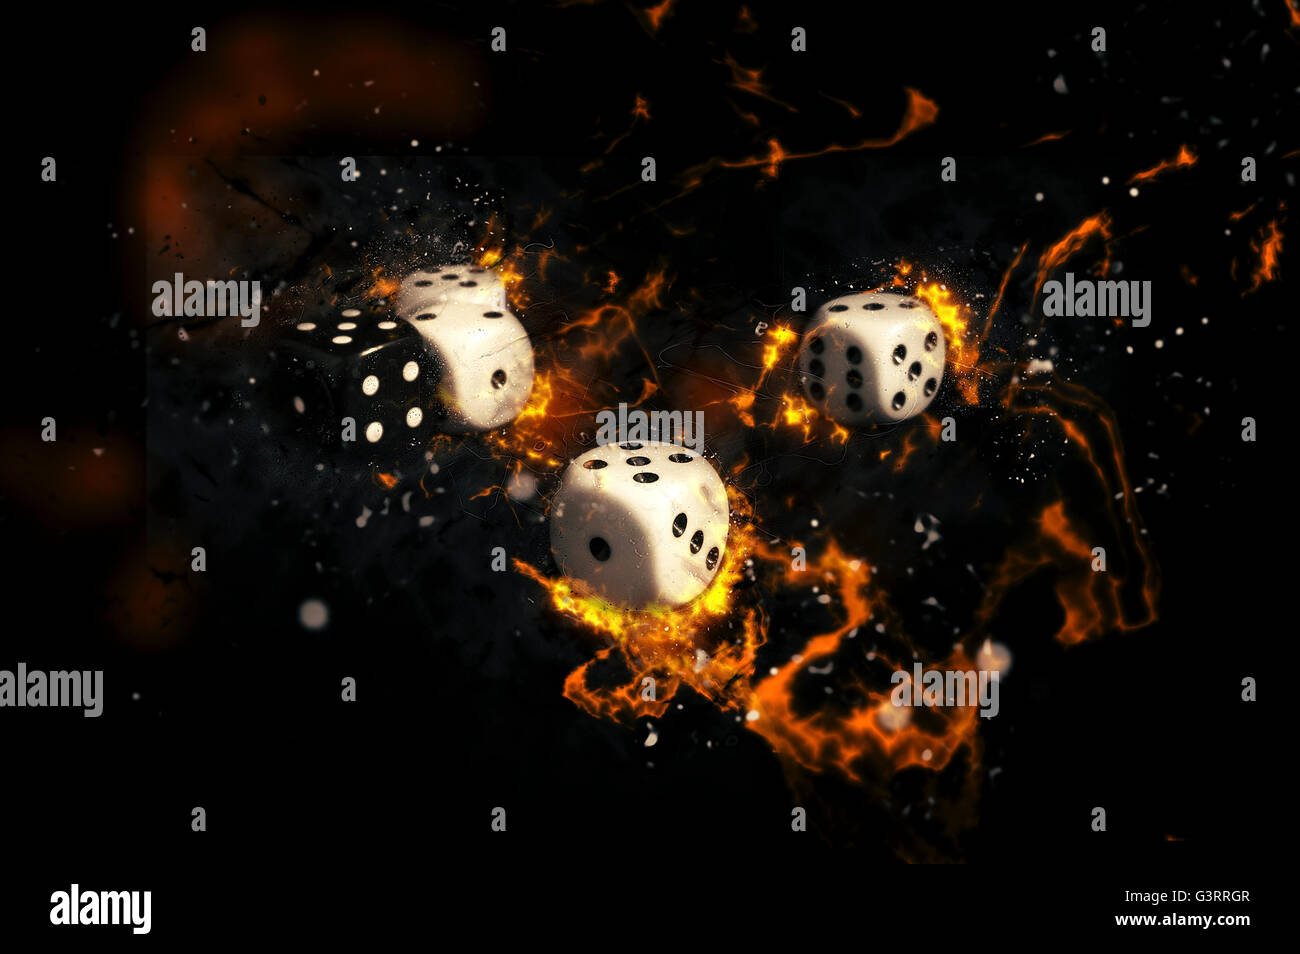 White and black gambling dices on fire. Stock Photo